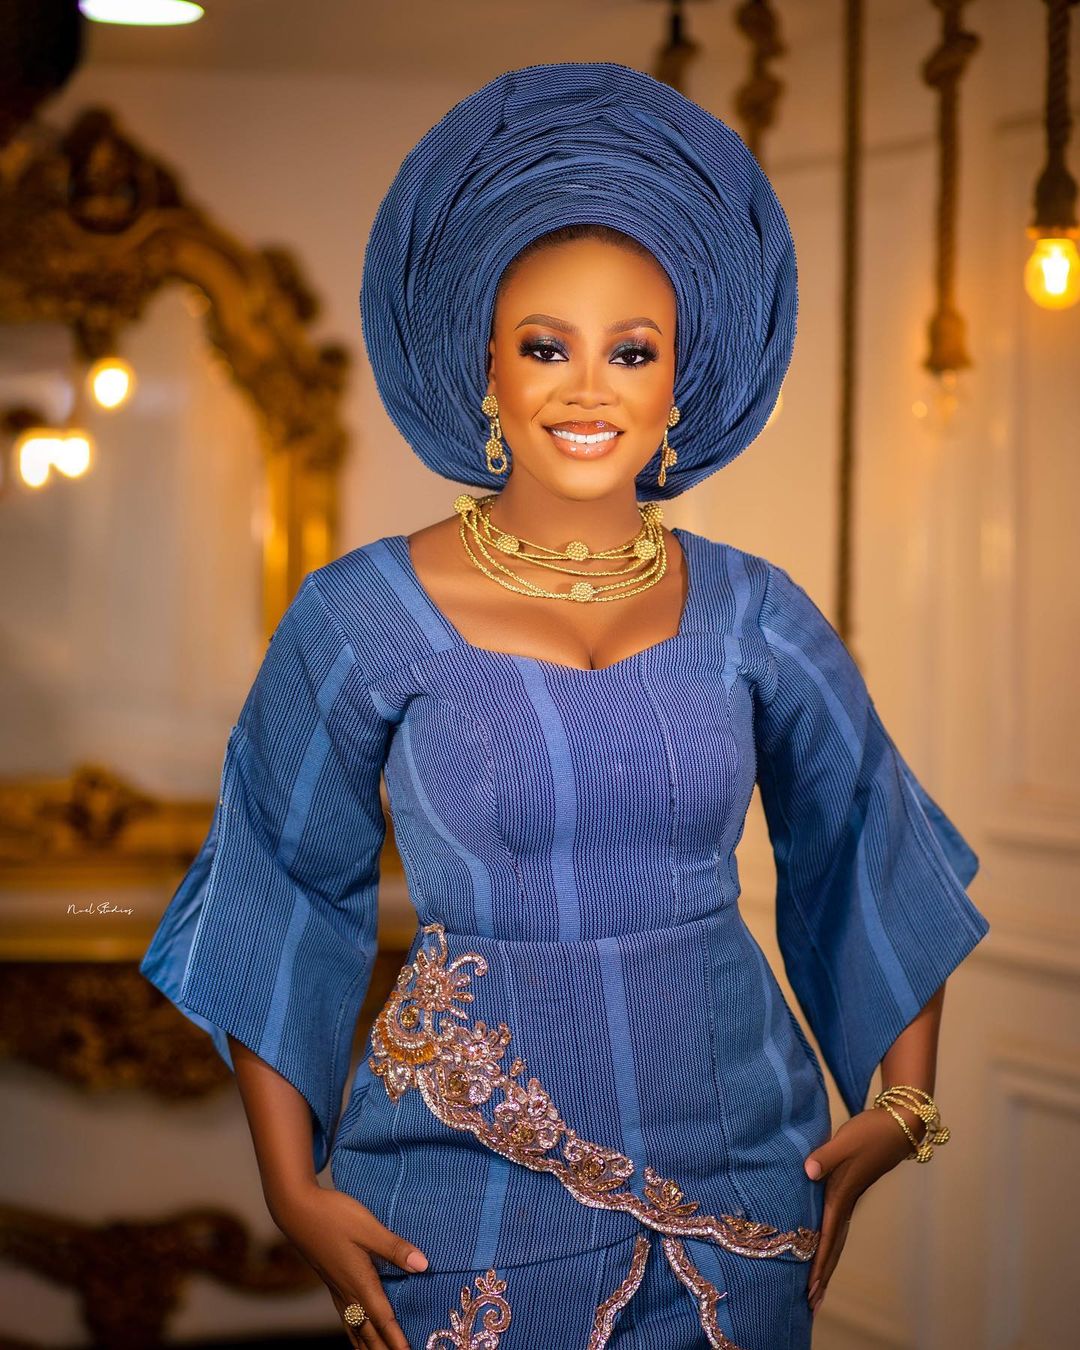 Show Up Simple & Elegant on Your Yoruba Trad With This Beauty Look